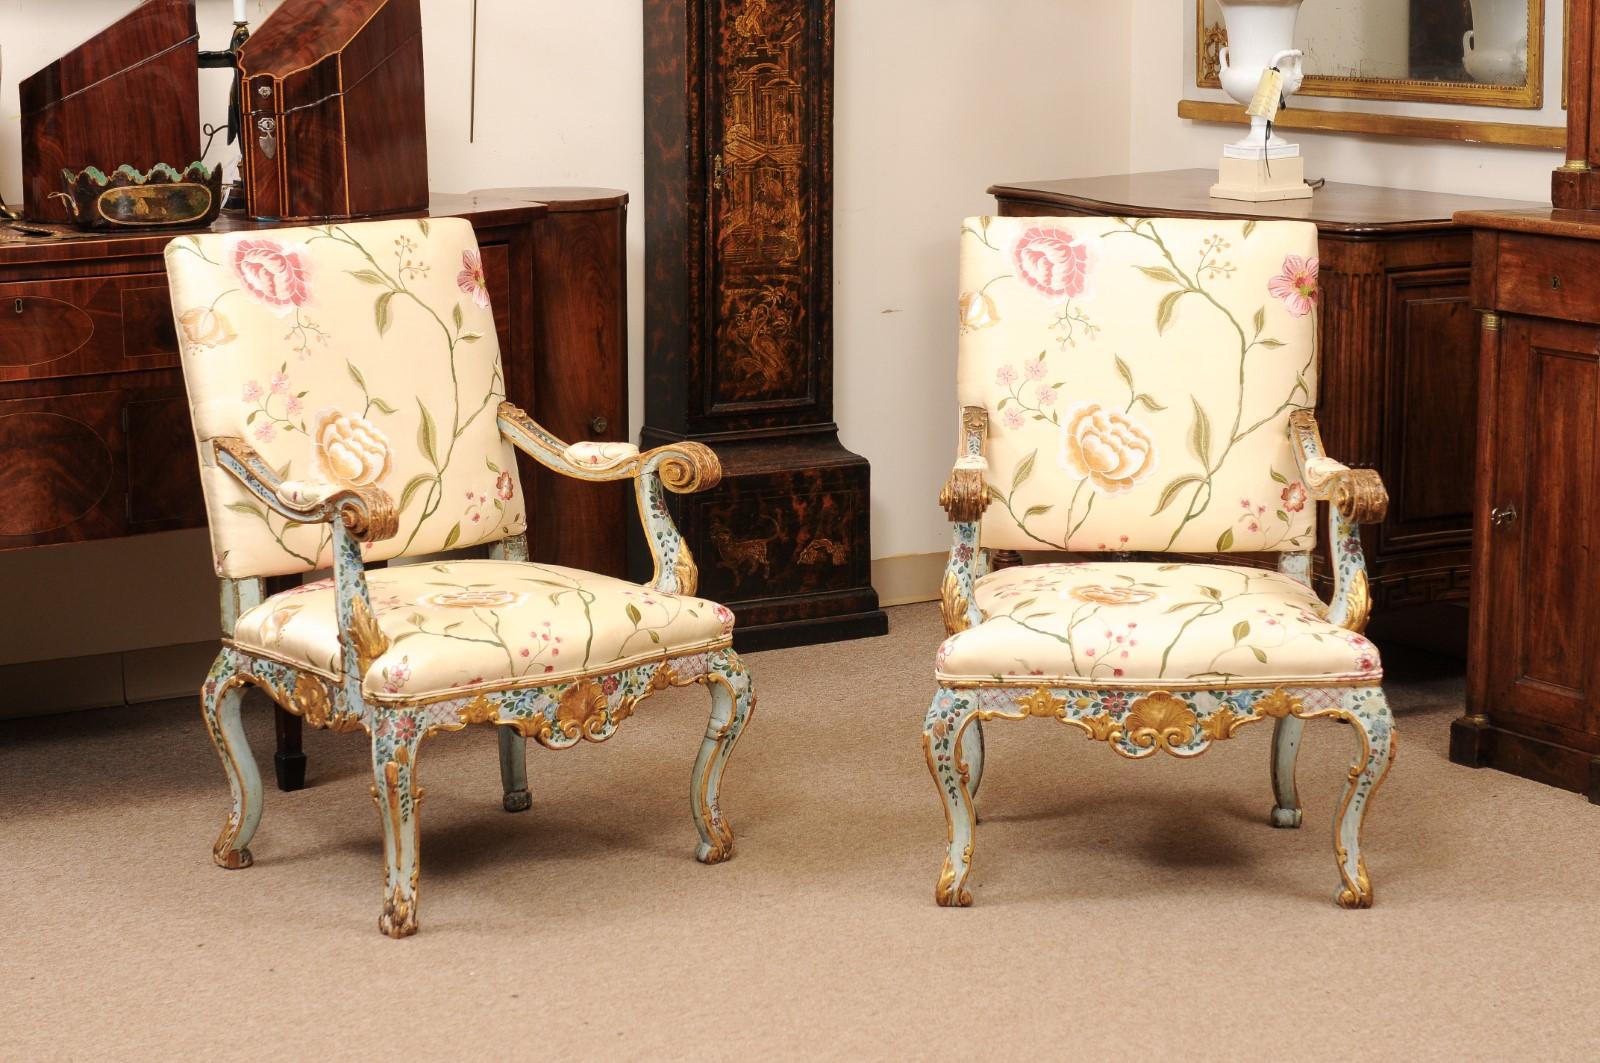 Pair of Venetian Blue Floral & Gilt Painted Armchairs Silk Upholstery, 19th Century